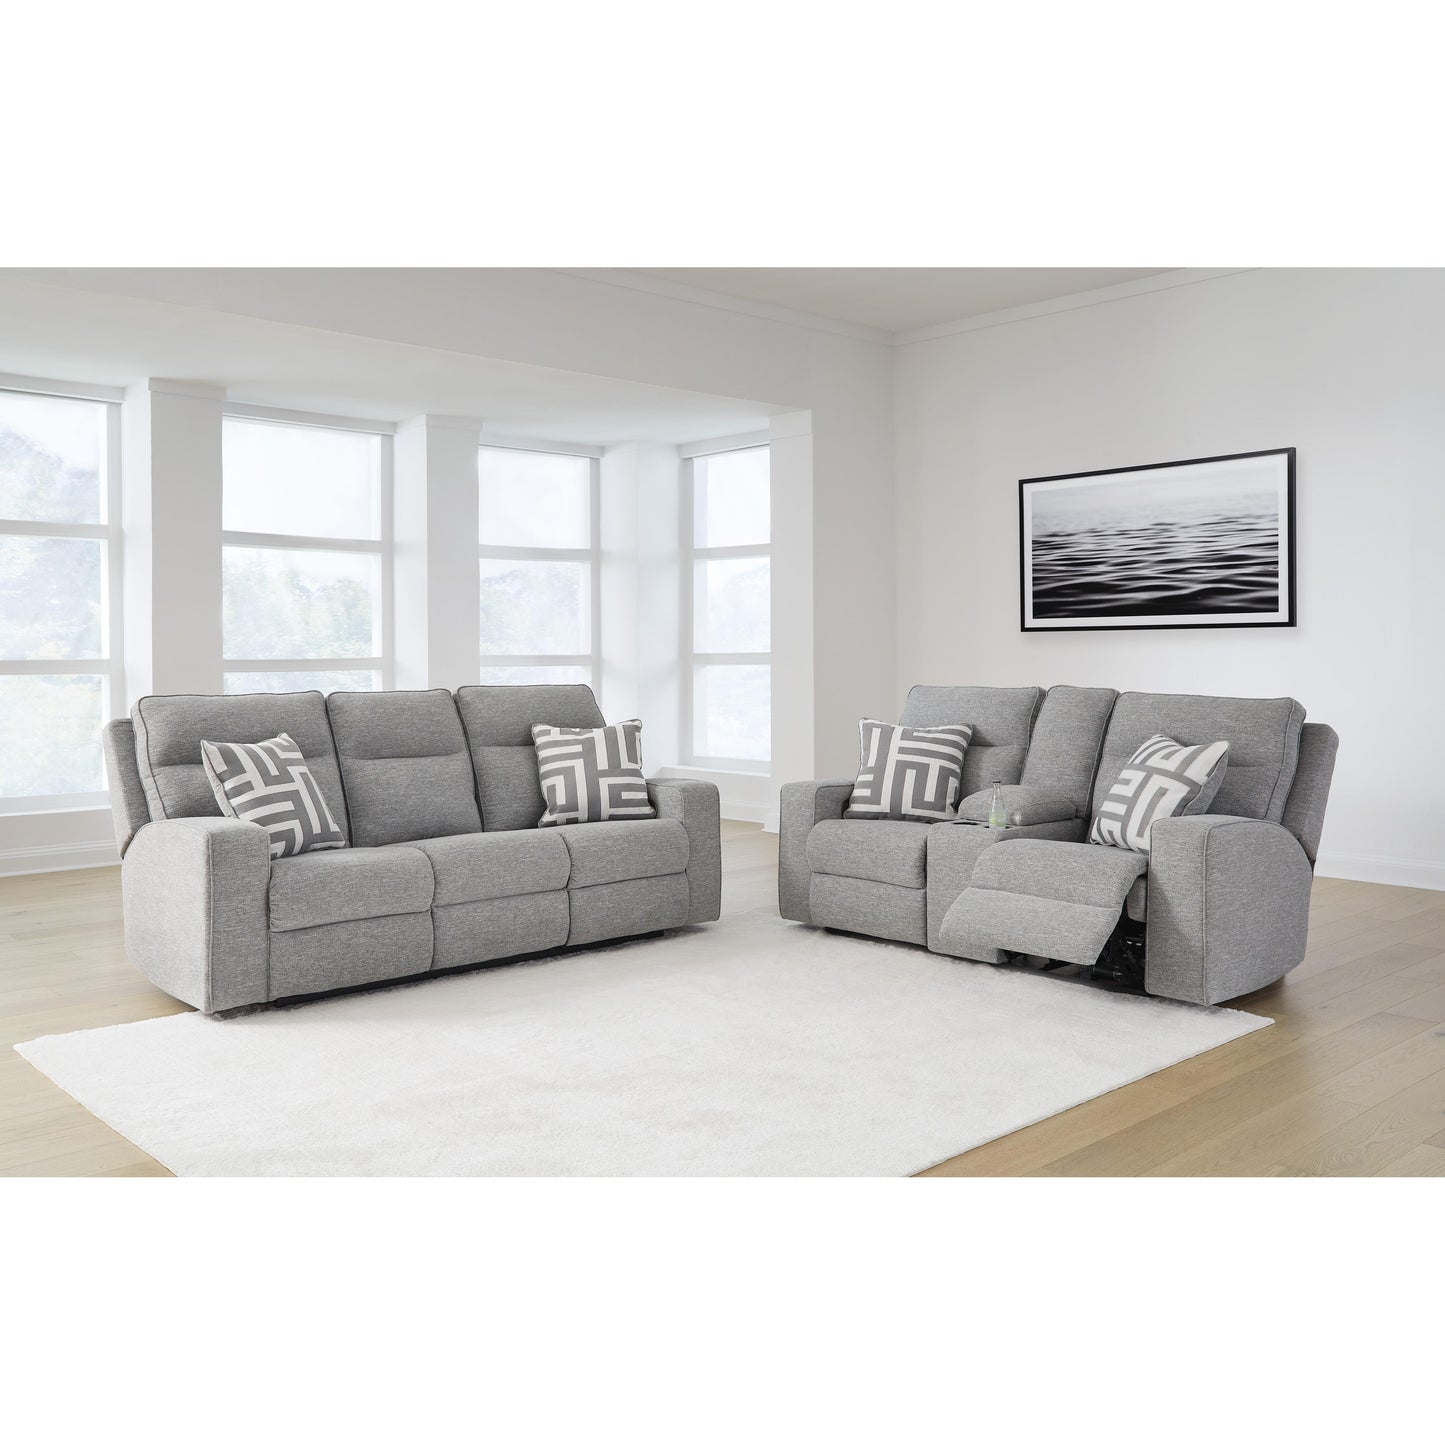 Signature Design by Ashley Biscoe Power Reclining Fabric Loveseat 9050318 IMAGE 14